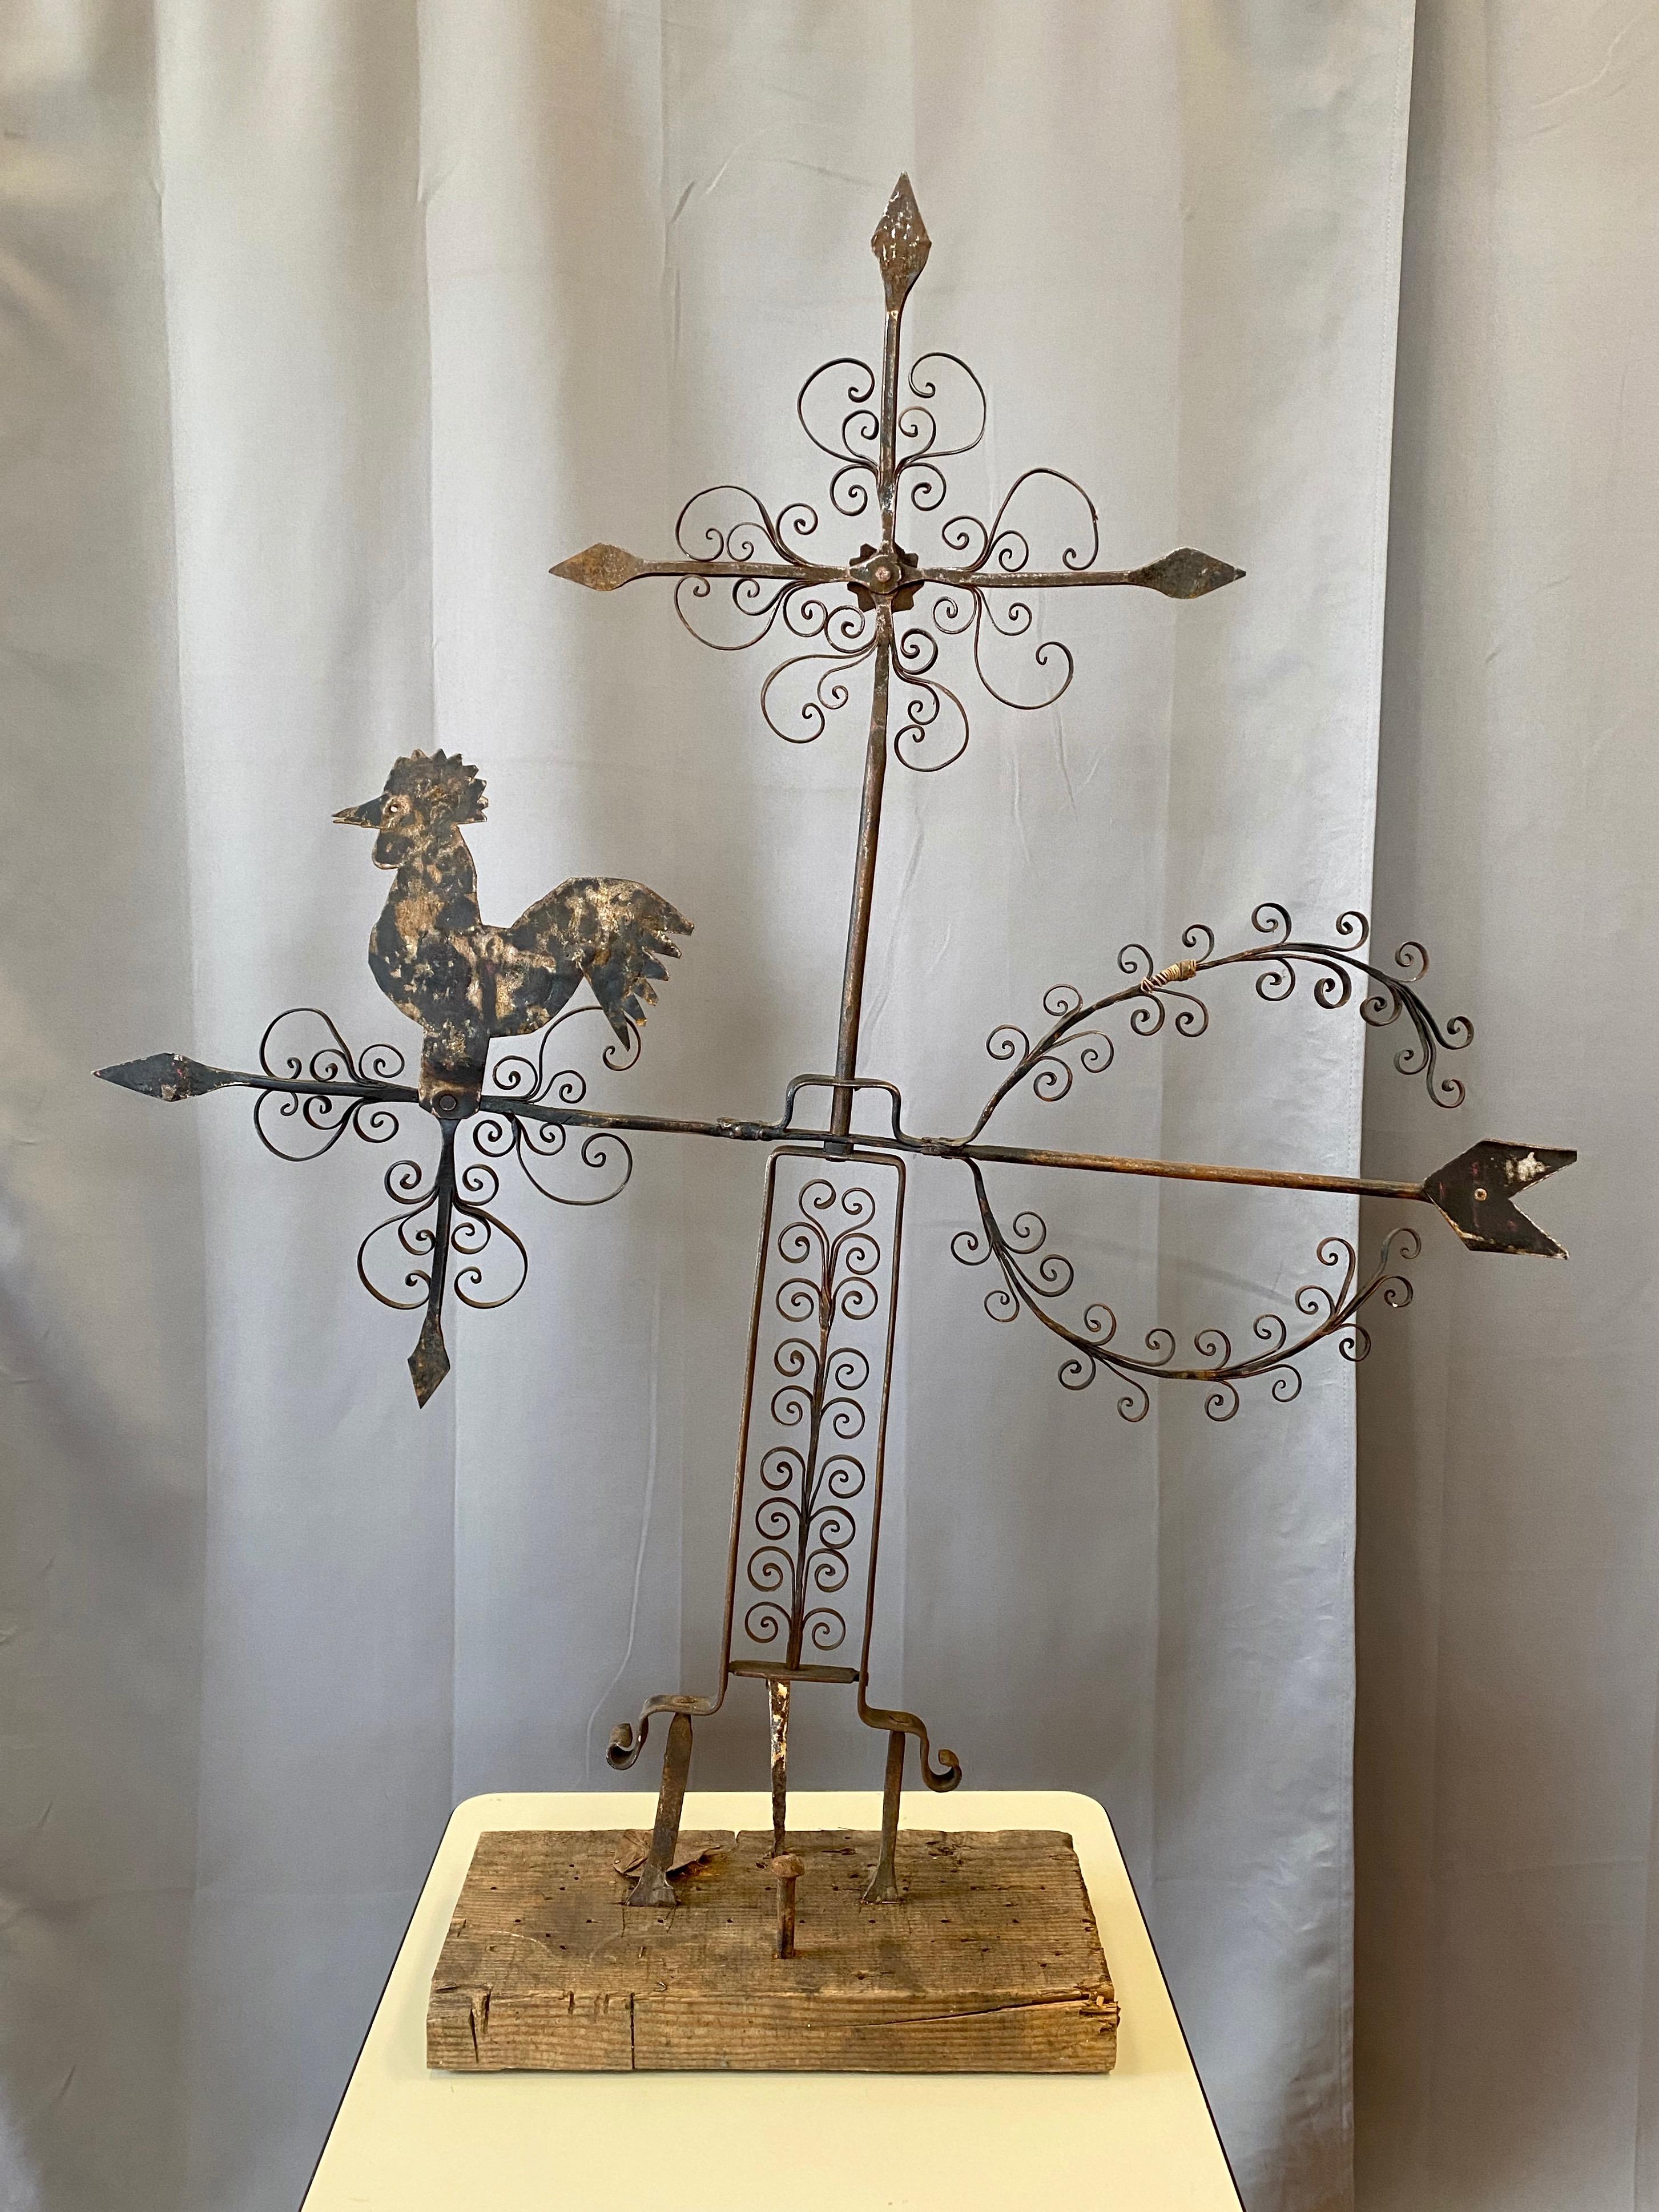 A large circa 1940 Mexican Folk Art wrought iron rooster weathervane presented on a rustic reclaimed wood base.

Features a sheet metal rooster perched upon a directional arrow, with wrought iron scroll work on delightful display throughout. Topped